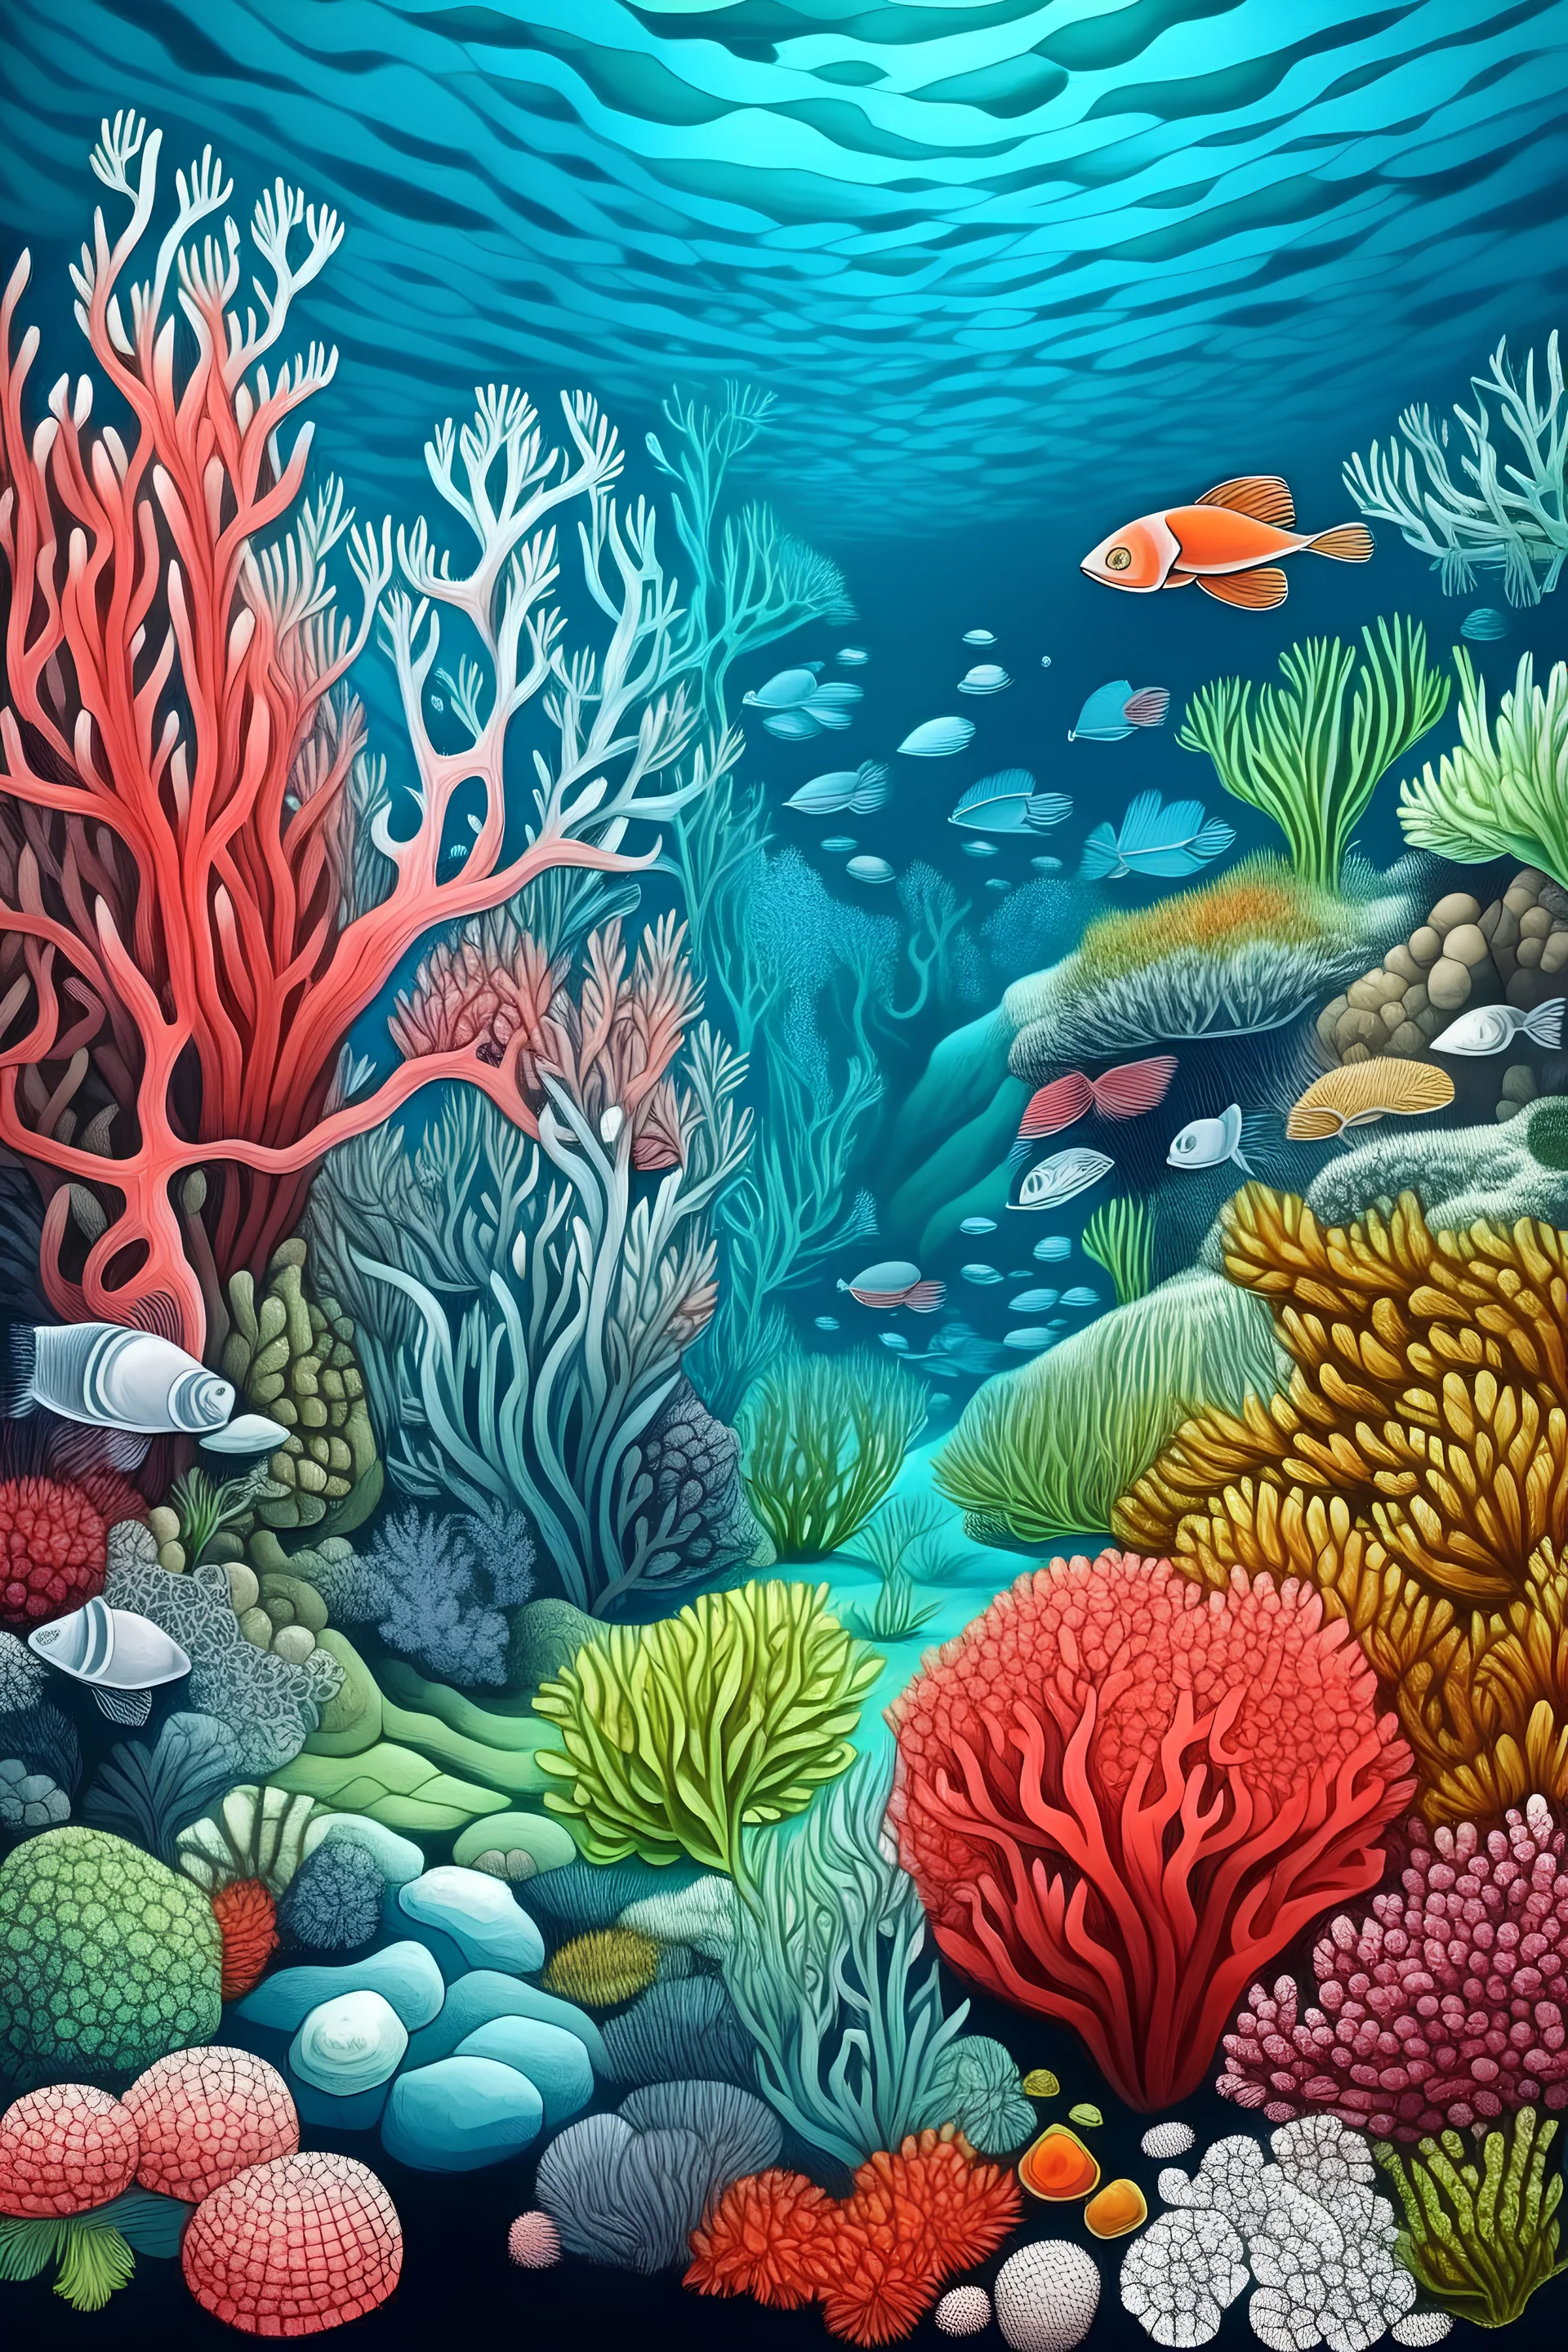 undersea life with corals and the picture looks like a drawing